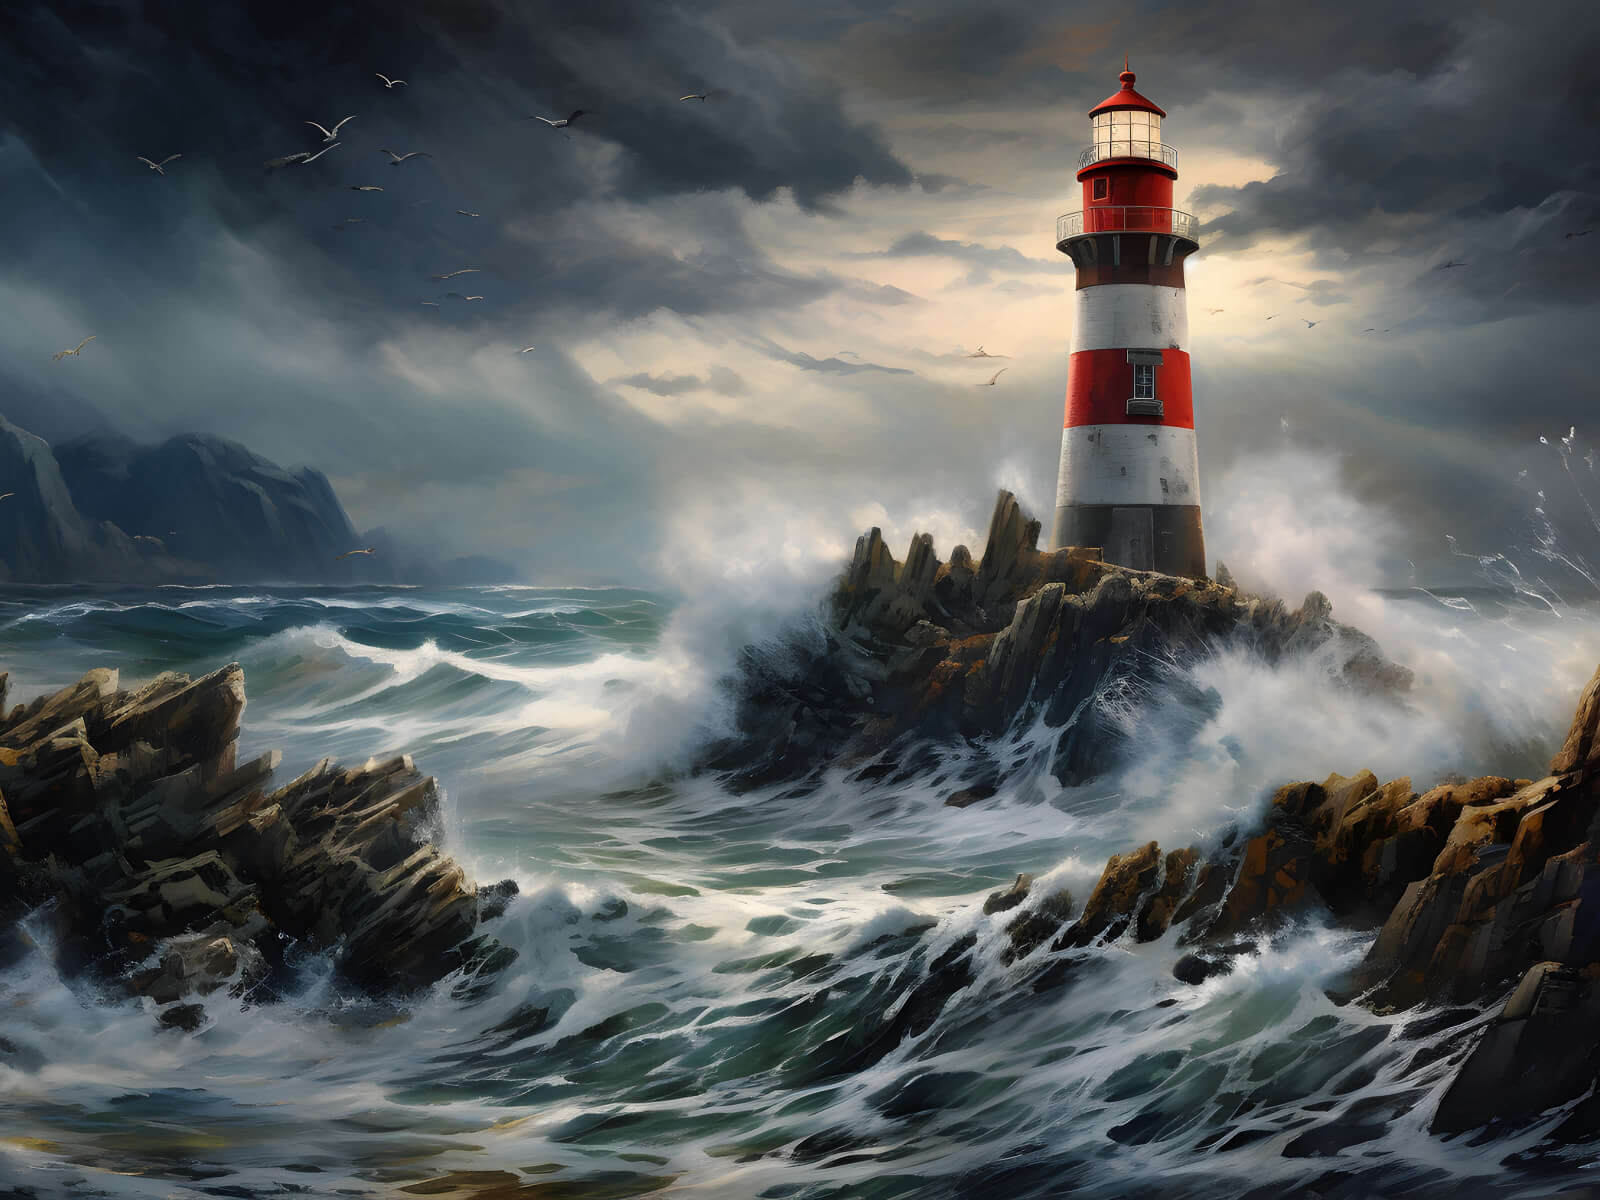 Lighthouse in the ocean waves wallpaper 1024x768